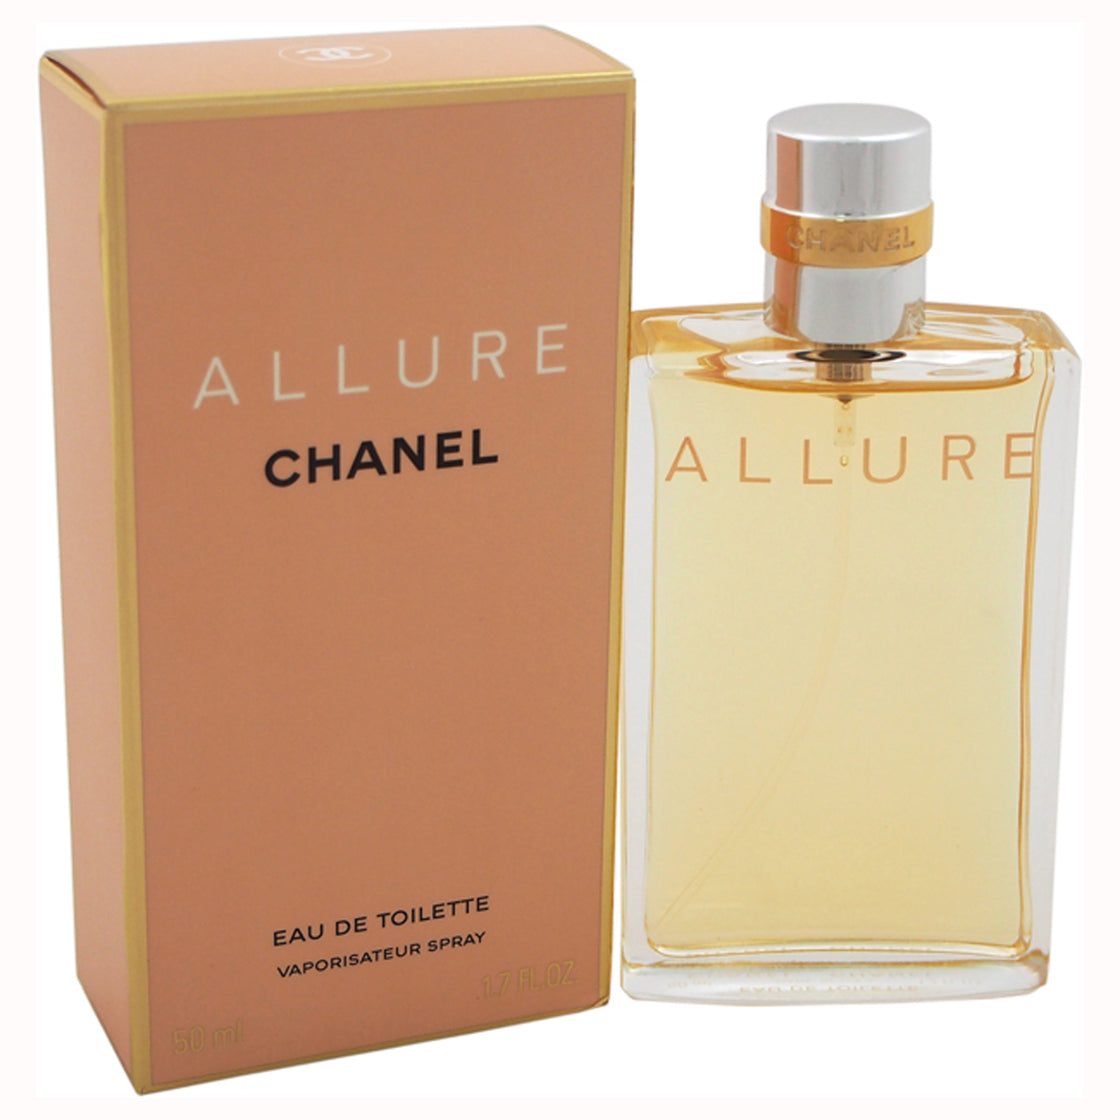 Allure by Chanel for Women - 1.7 oz EDT Spray